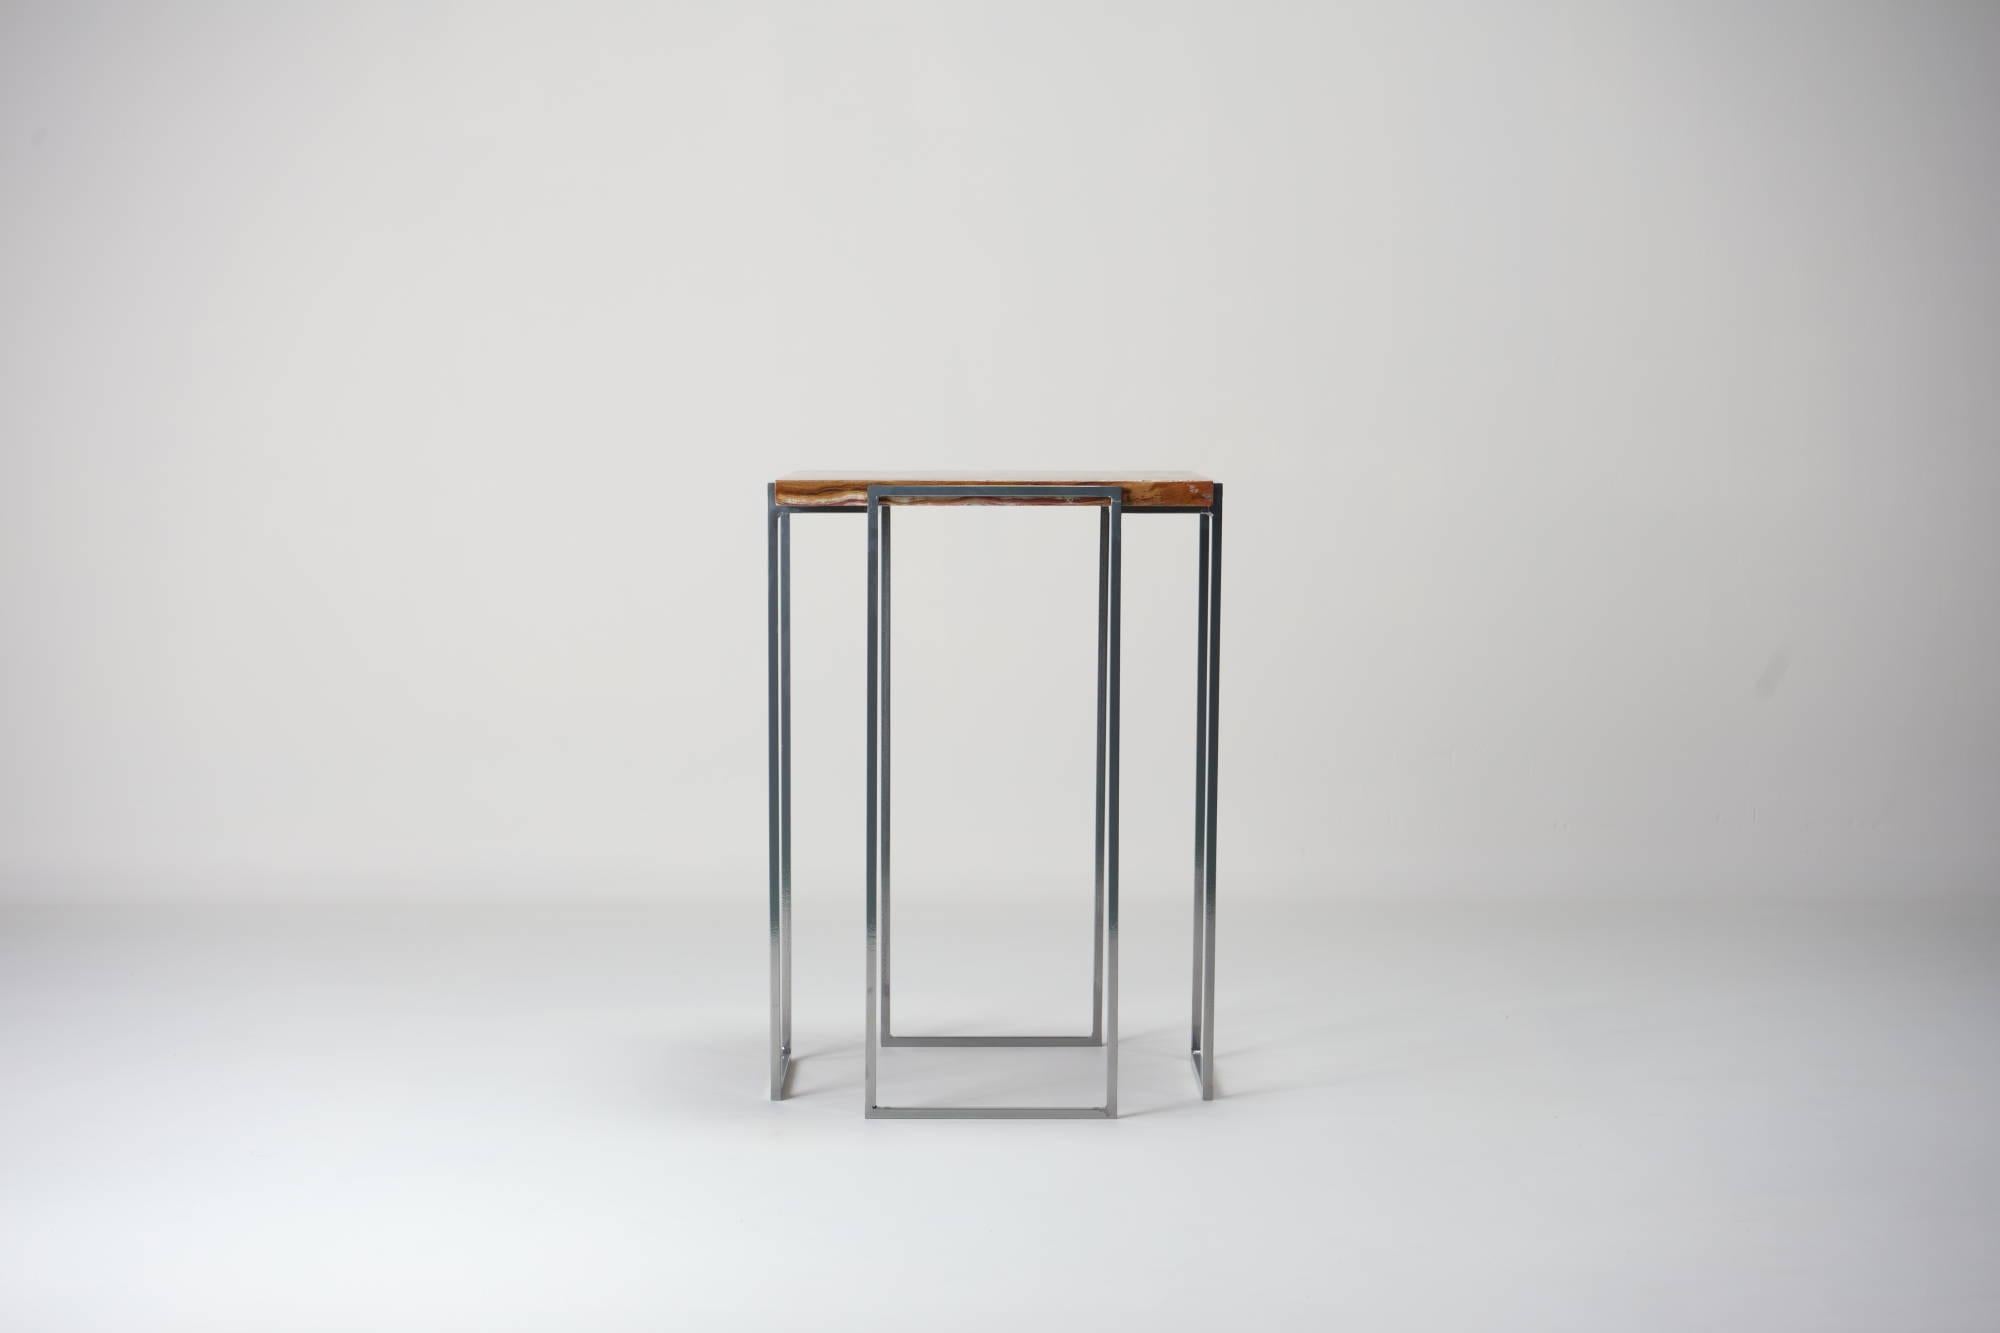 Italian Kaus Cromo, Persian Onyx Side Table By DFdesignlab Handmade in Italy For Sale